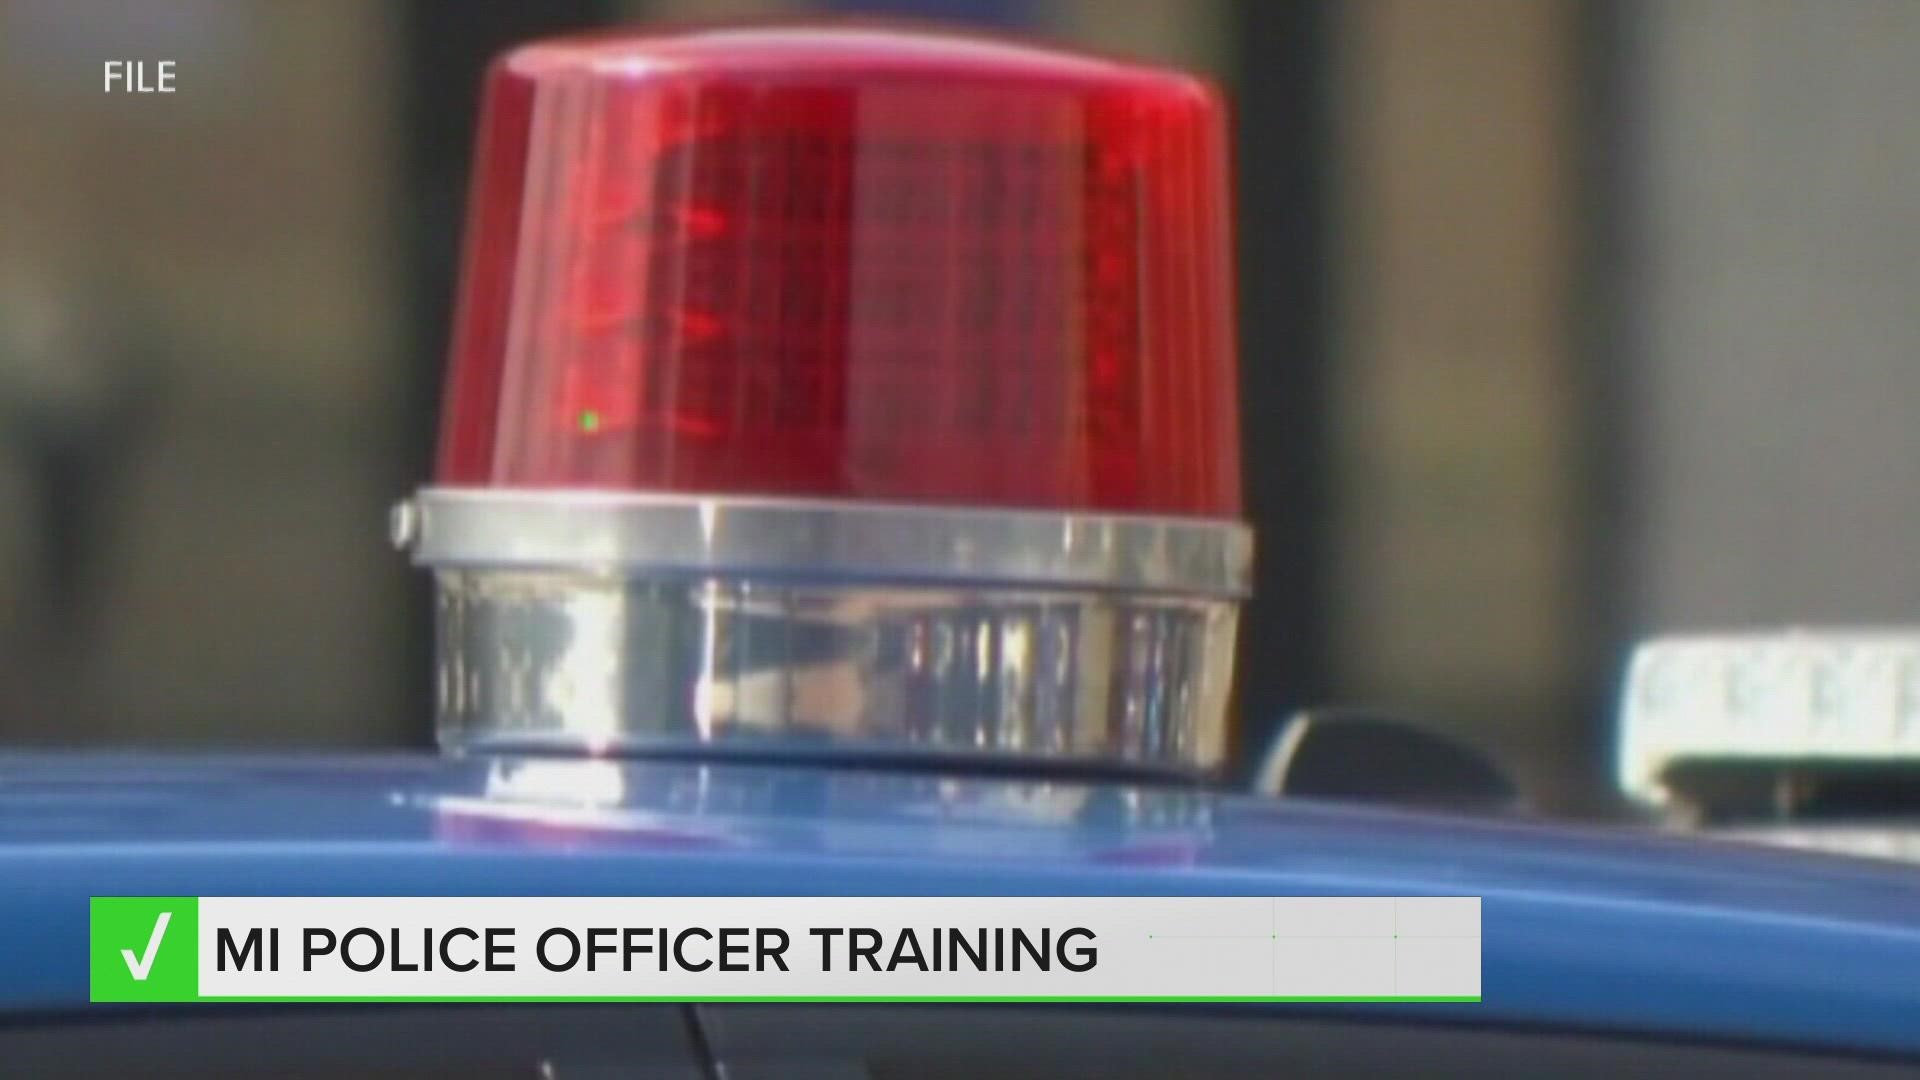 State licensing authorities require police officers complete a minimum of 594 hours of training.